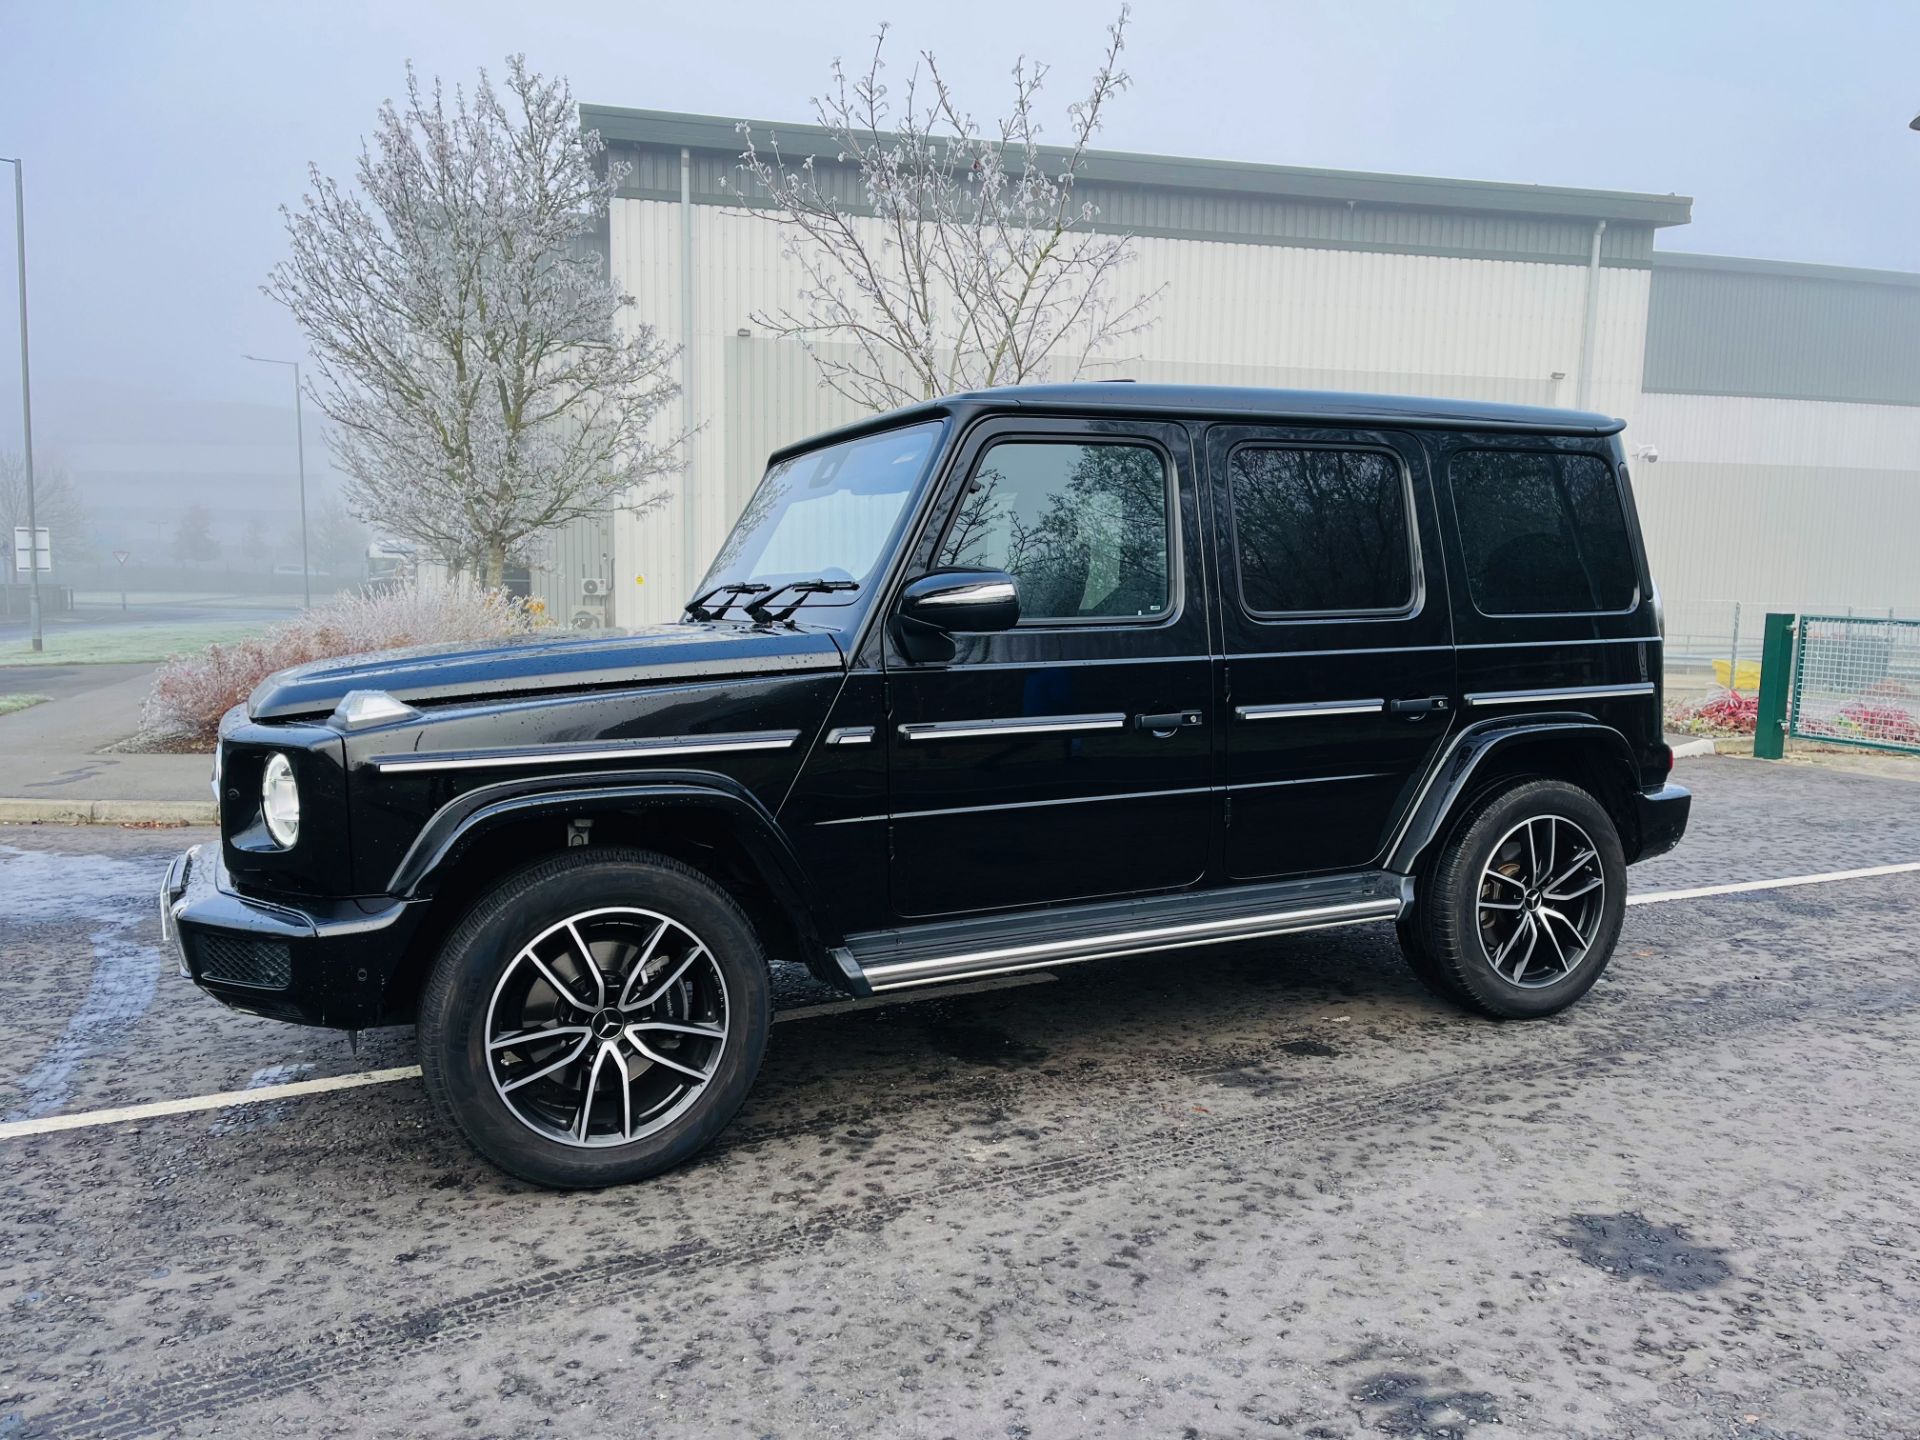 MERCEDES G400d AMG-LINE PREMIUM PLUS (72 REG) 1 OWNER WITH ONLY 9500 MILES - GREAT SPEC - Image 7 of 45